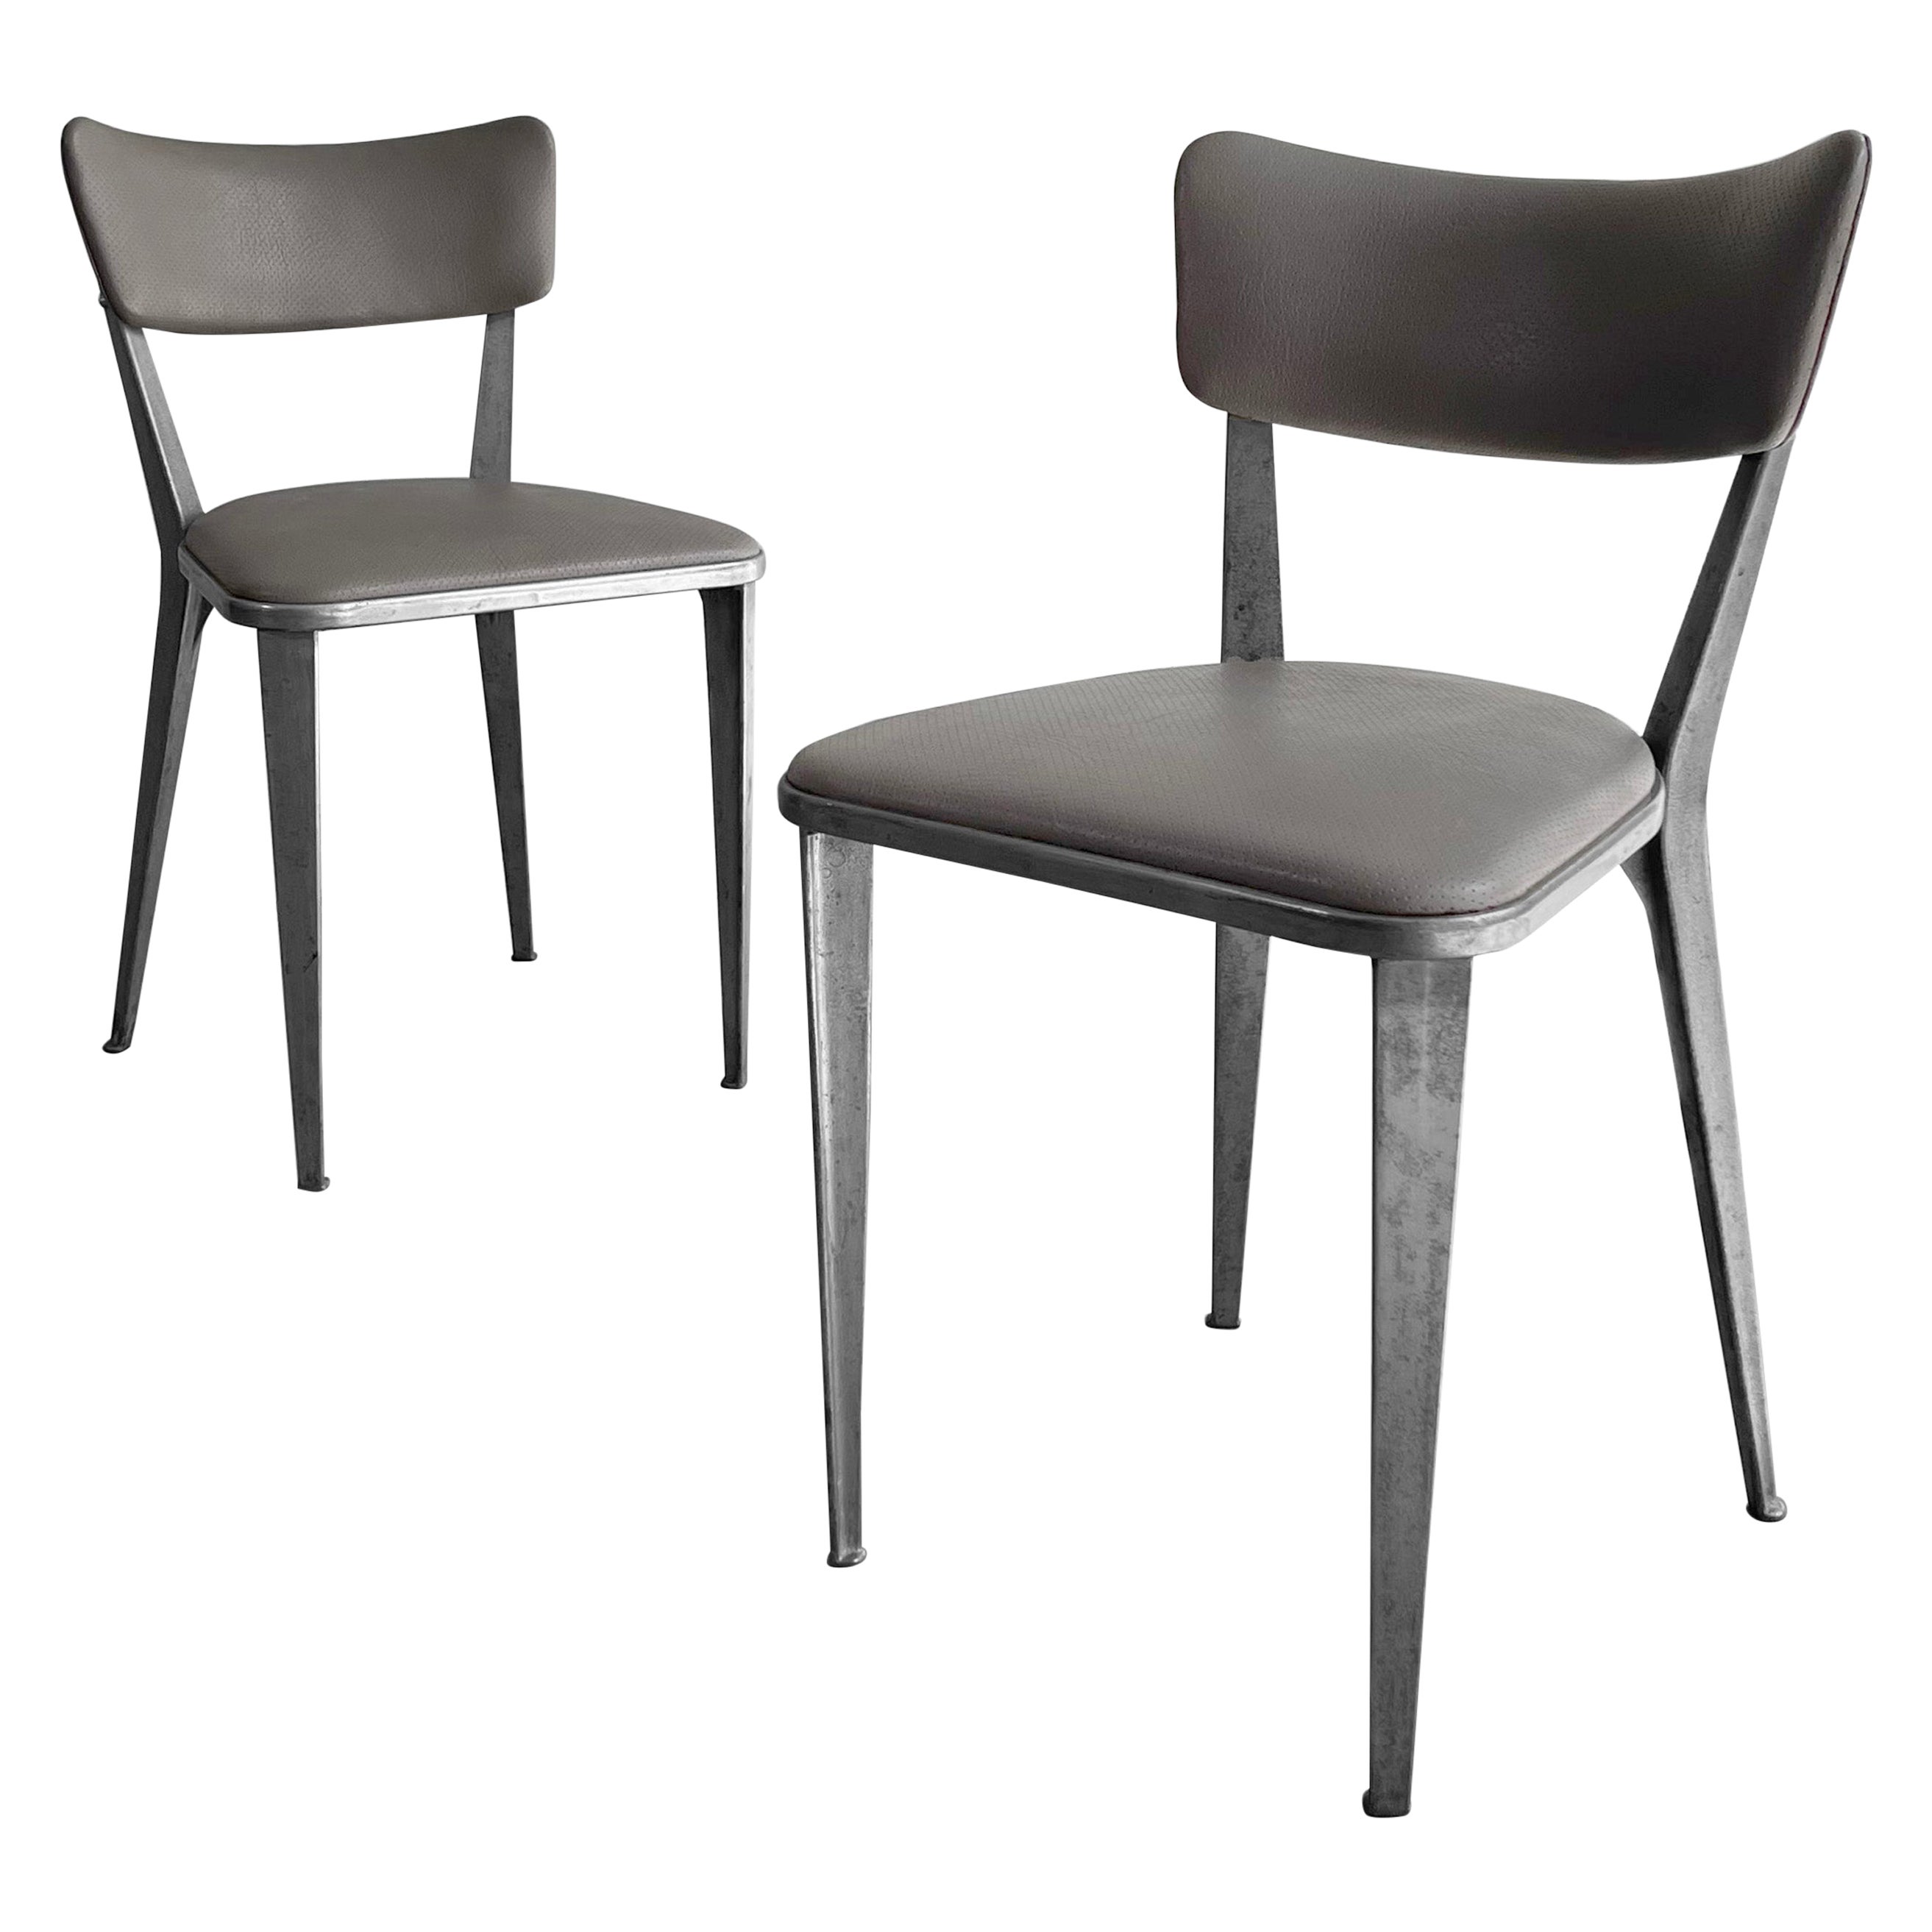 Cast Aluminum and Vinyl "BA3" Chairs by Ernest Race for Race Furniture